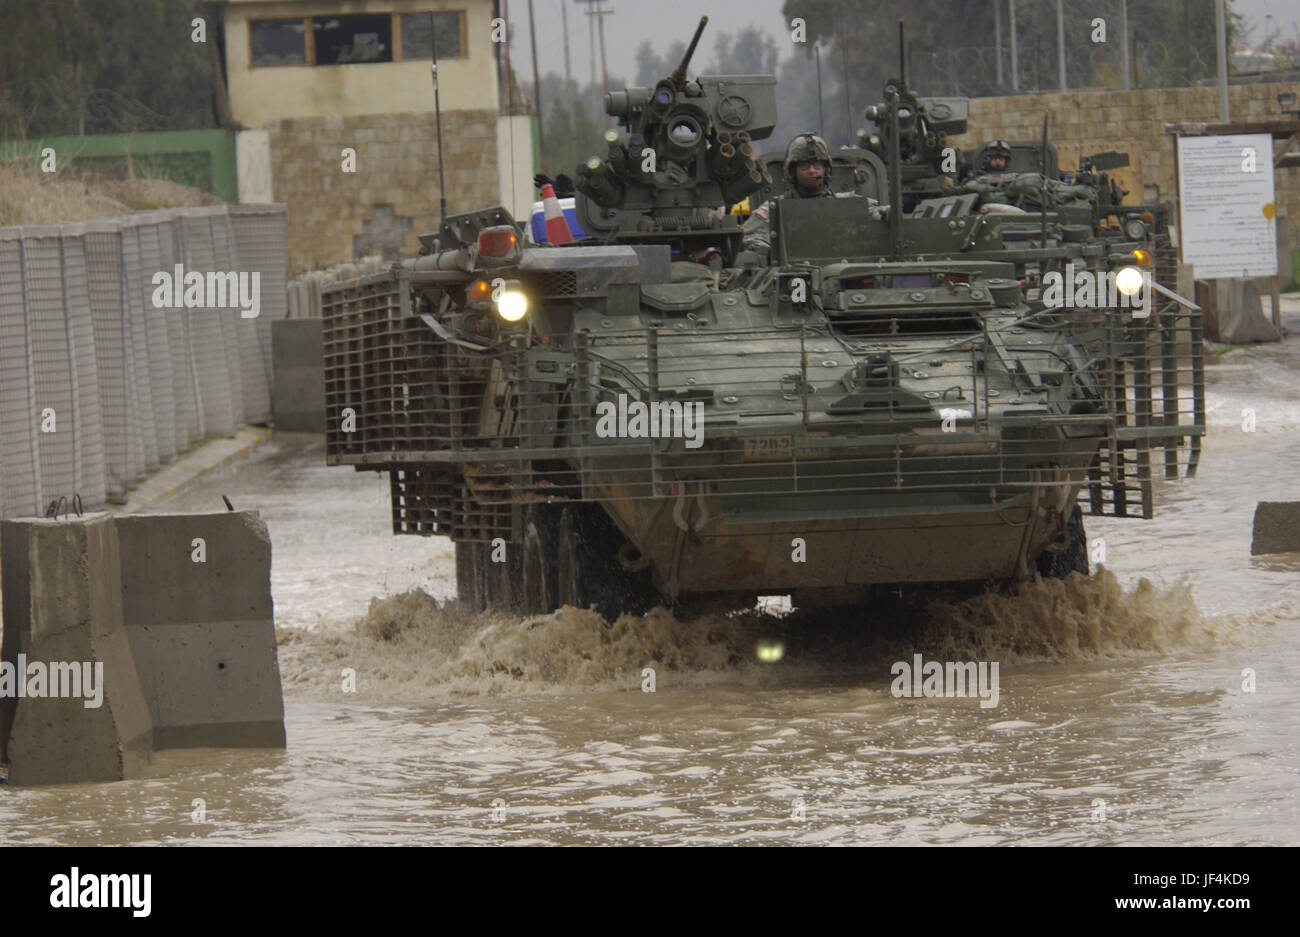 060214-F-2869F-016  U.S. Army Stryker combat vehicles ford a flooded street as they patrol in Mosul, Iraq, on Feb. 14, 2006.  These Strykers are attached to the 2nd Battalion, 1st Infantry Regiment, 172nd Infantry Brigade.  DoD photo by Tech. Sgt. John M. Foster, U.S. Air Force.  (Released) Stock Photo